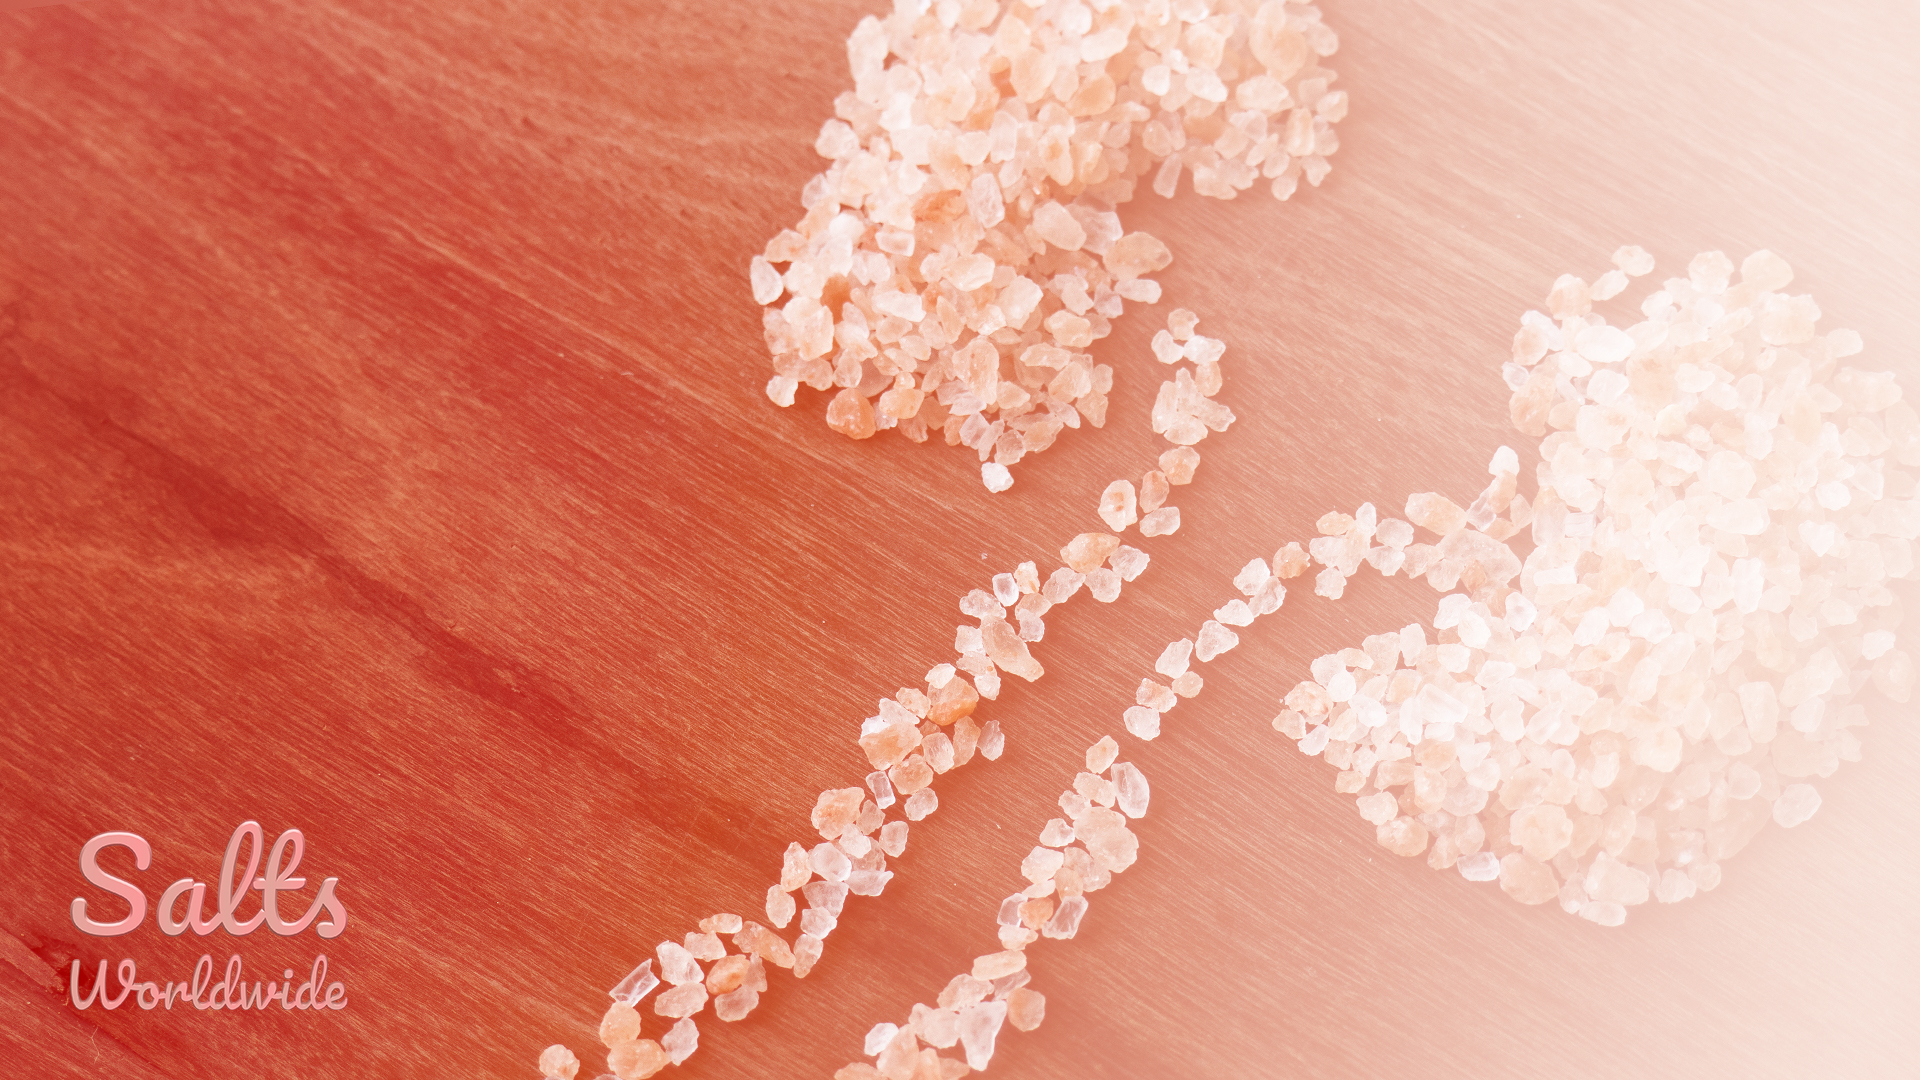 Can You Take Too Much Himalayan Salt - Something to Keep in Mind